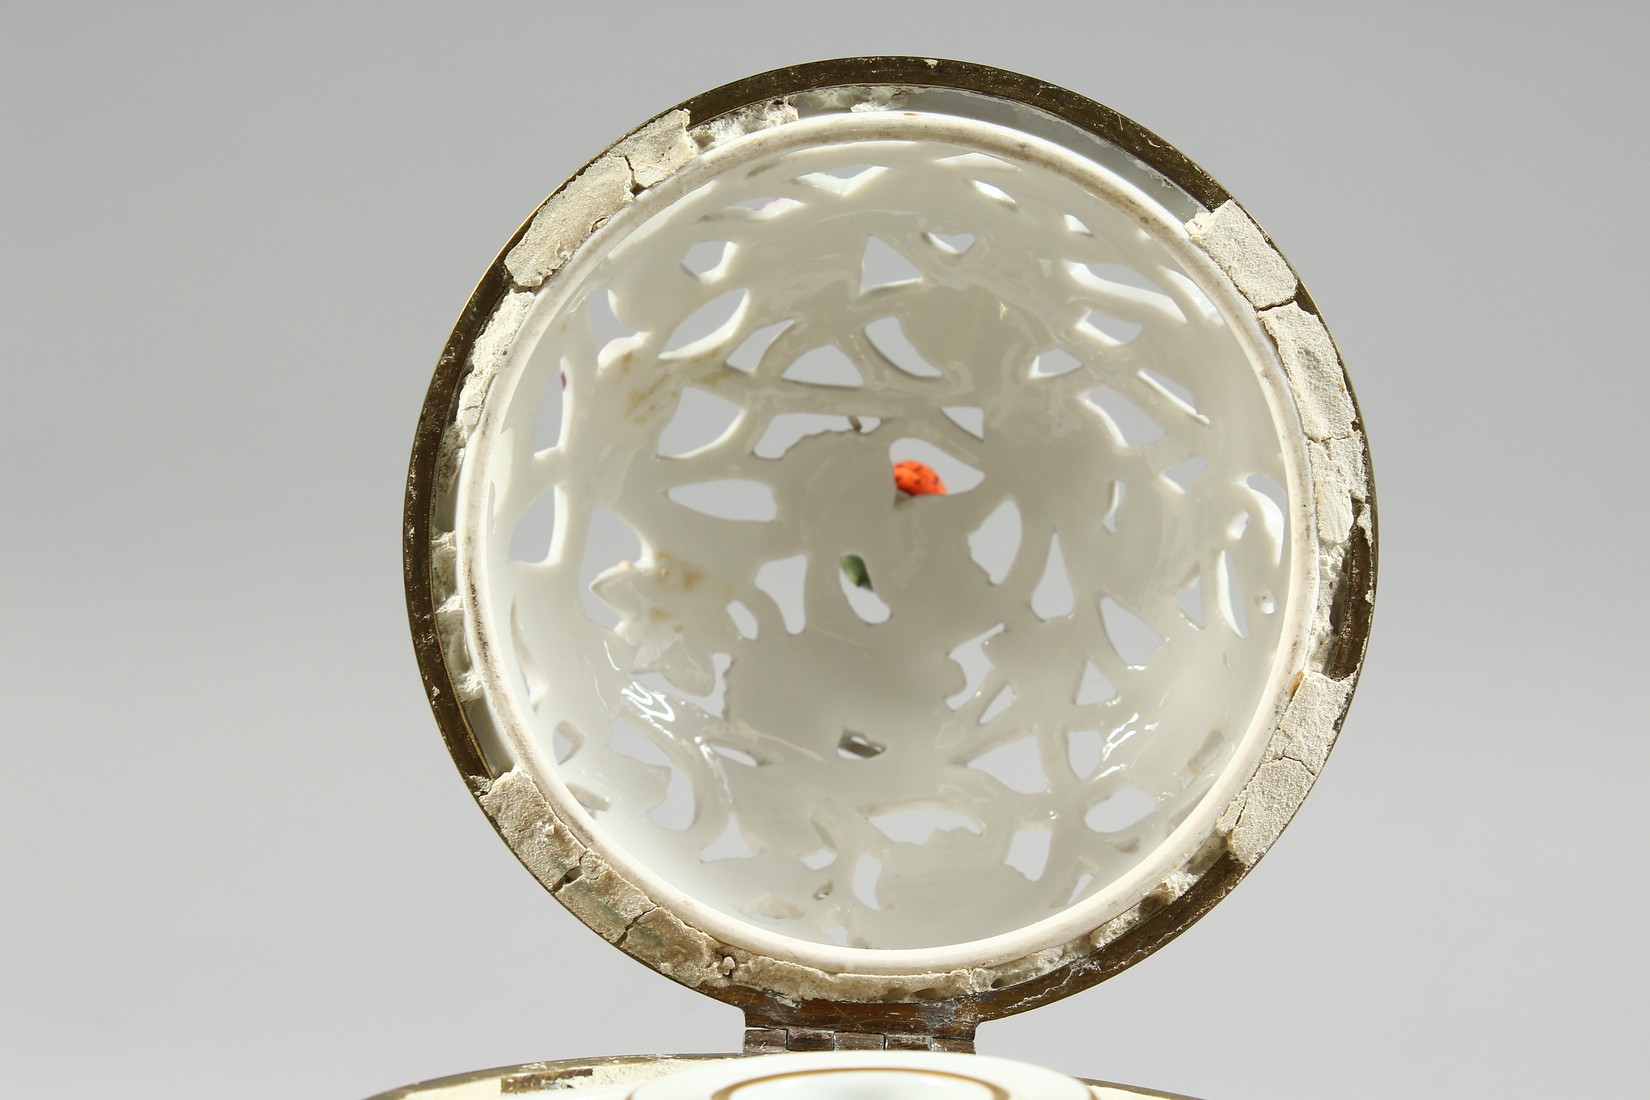 A GOOD 19TH CENTURY CONTINENTAL PORCELAIN CIRCULAR INKSTAND with pierced floral top, painted with - Image 6 of 10